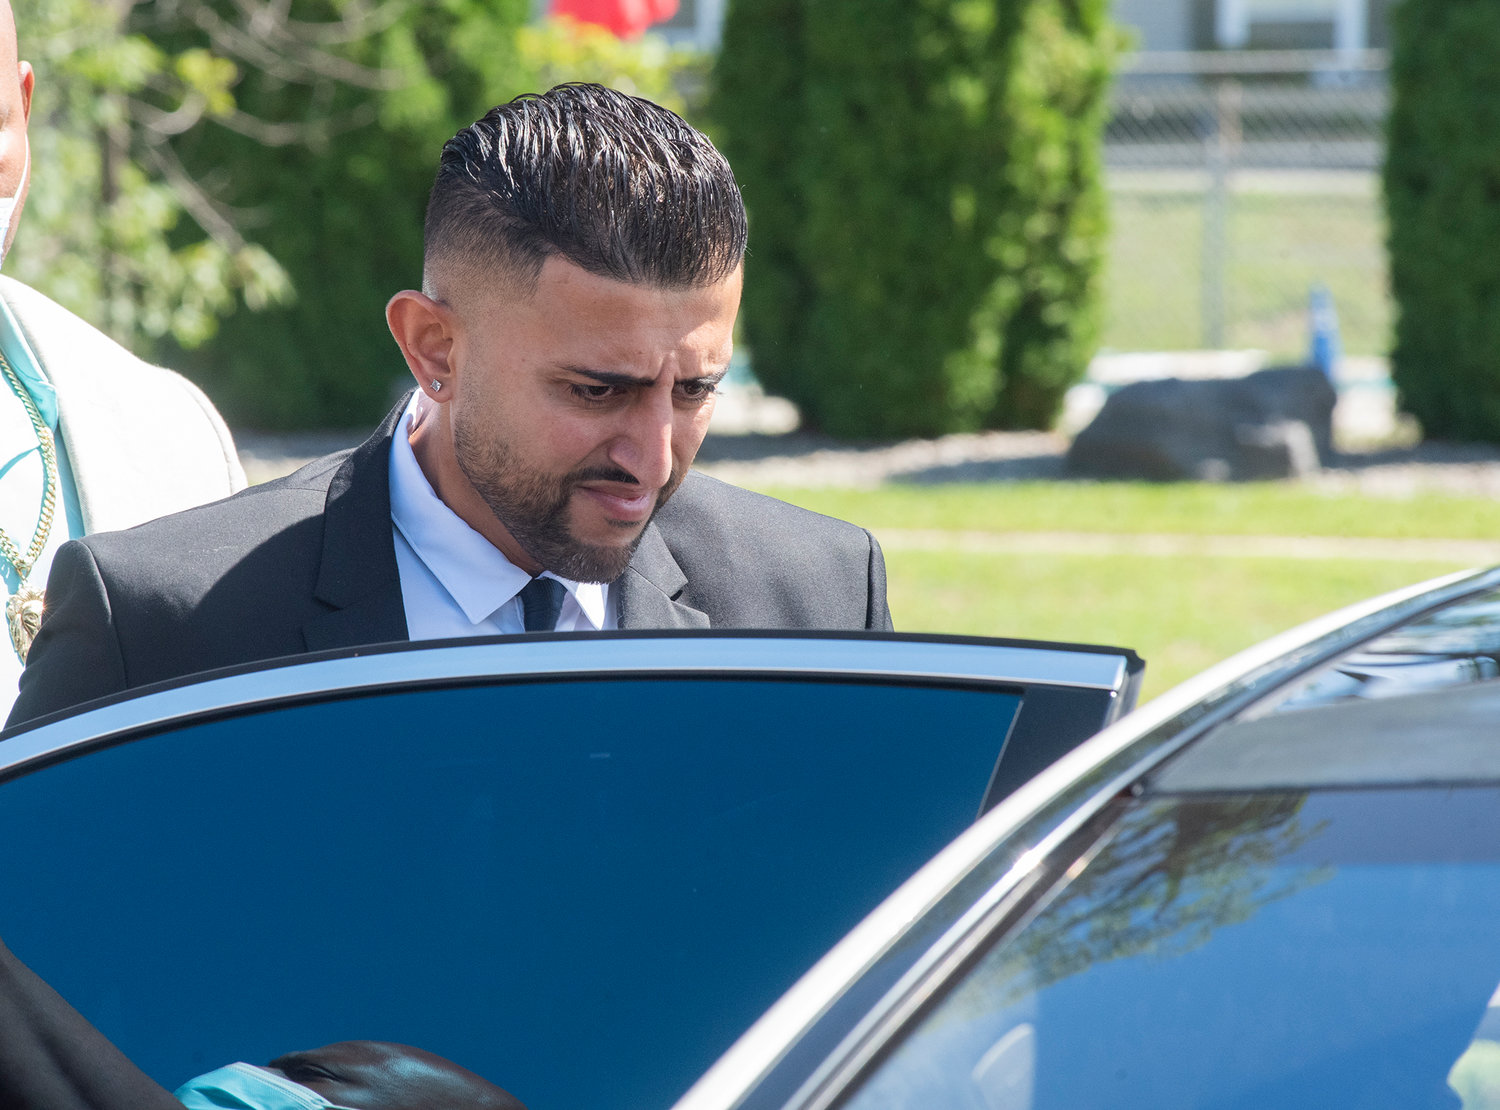 Nauman Hussain enters an awaiting vehicle outside the Schoharie County Courthouse on Wednesday, Aug. 31, after his plea deal was vacated by the judge and a new trial set in the limo crash that killed 20 people.